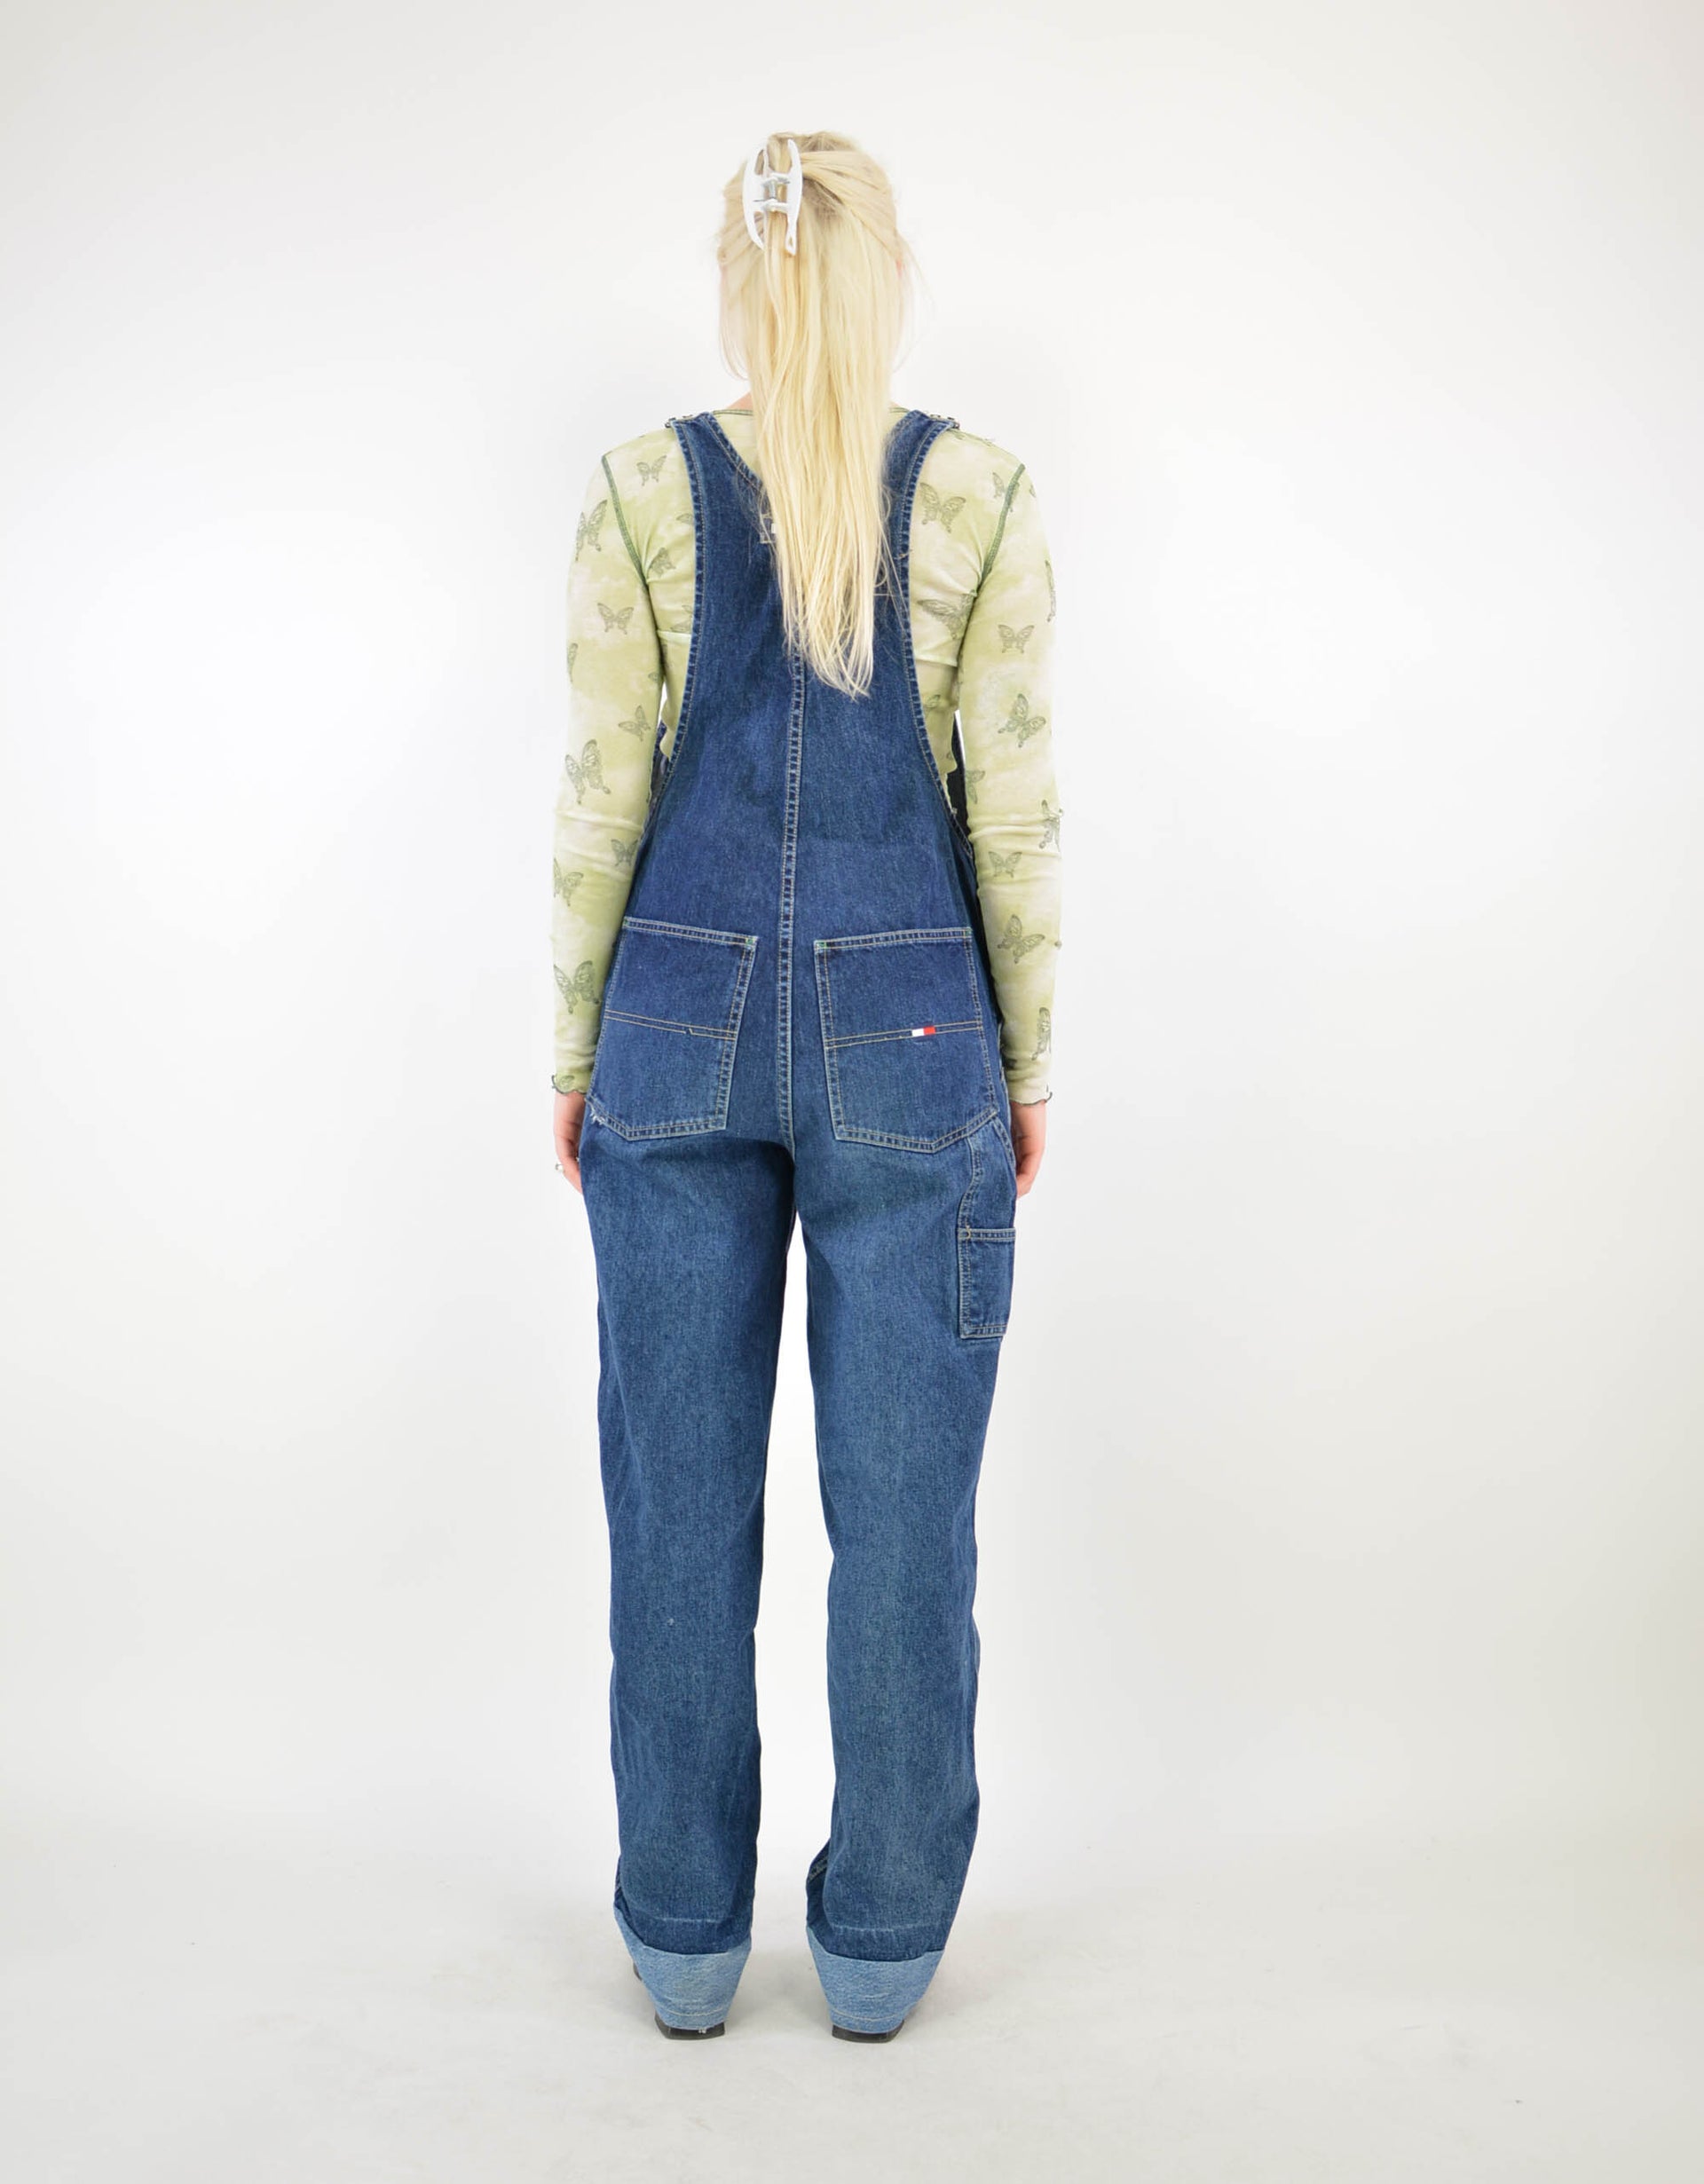 Tommy dungaree - PICKNWEIGHT - VINTAGE KILO STORE